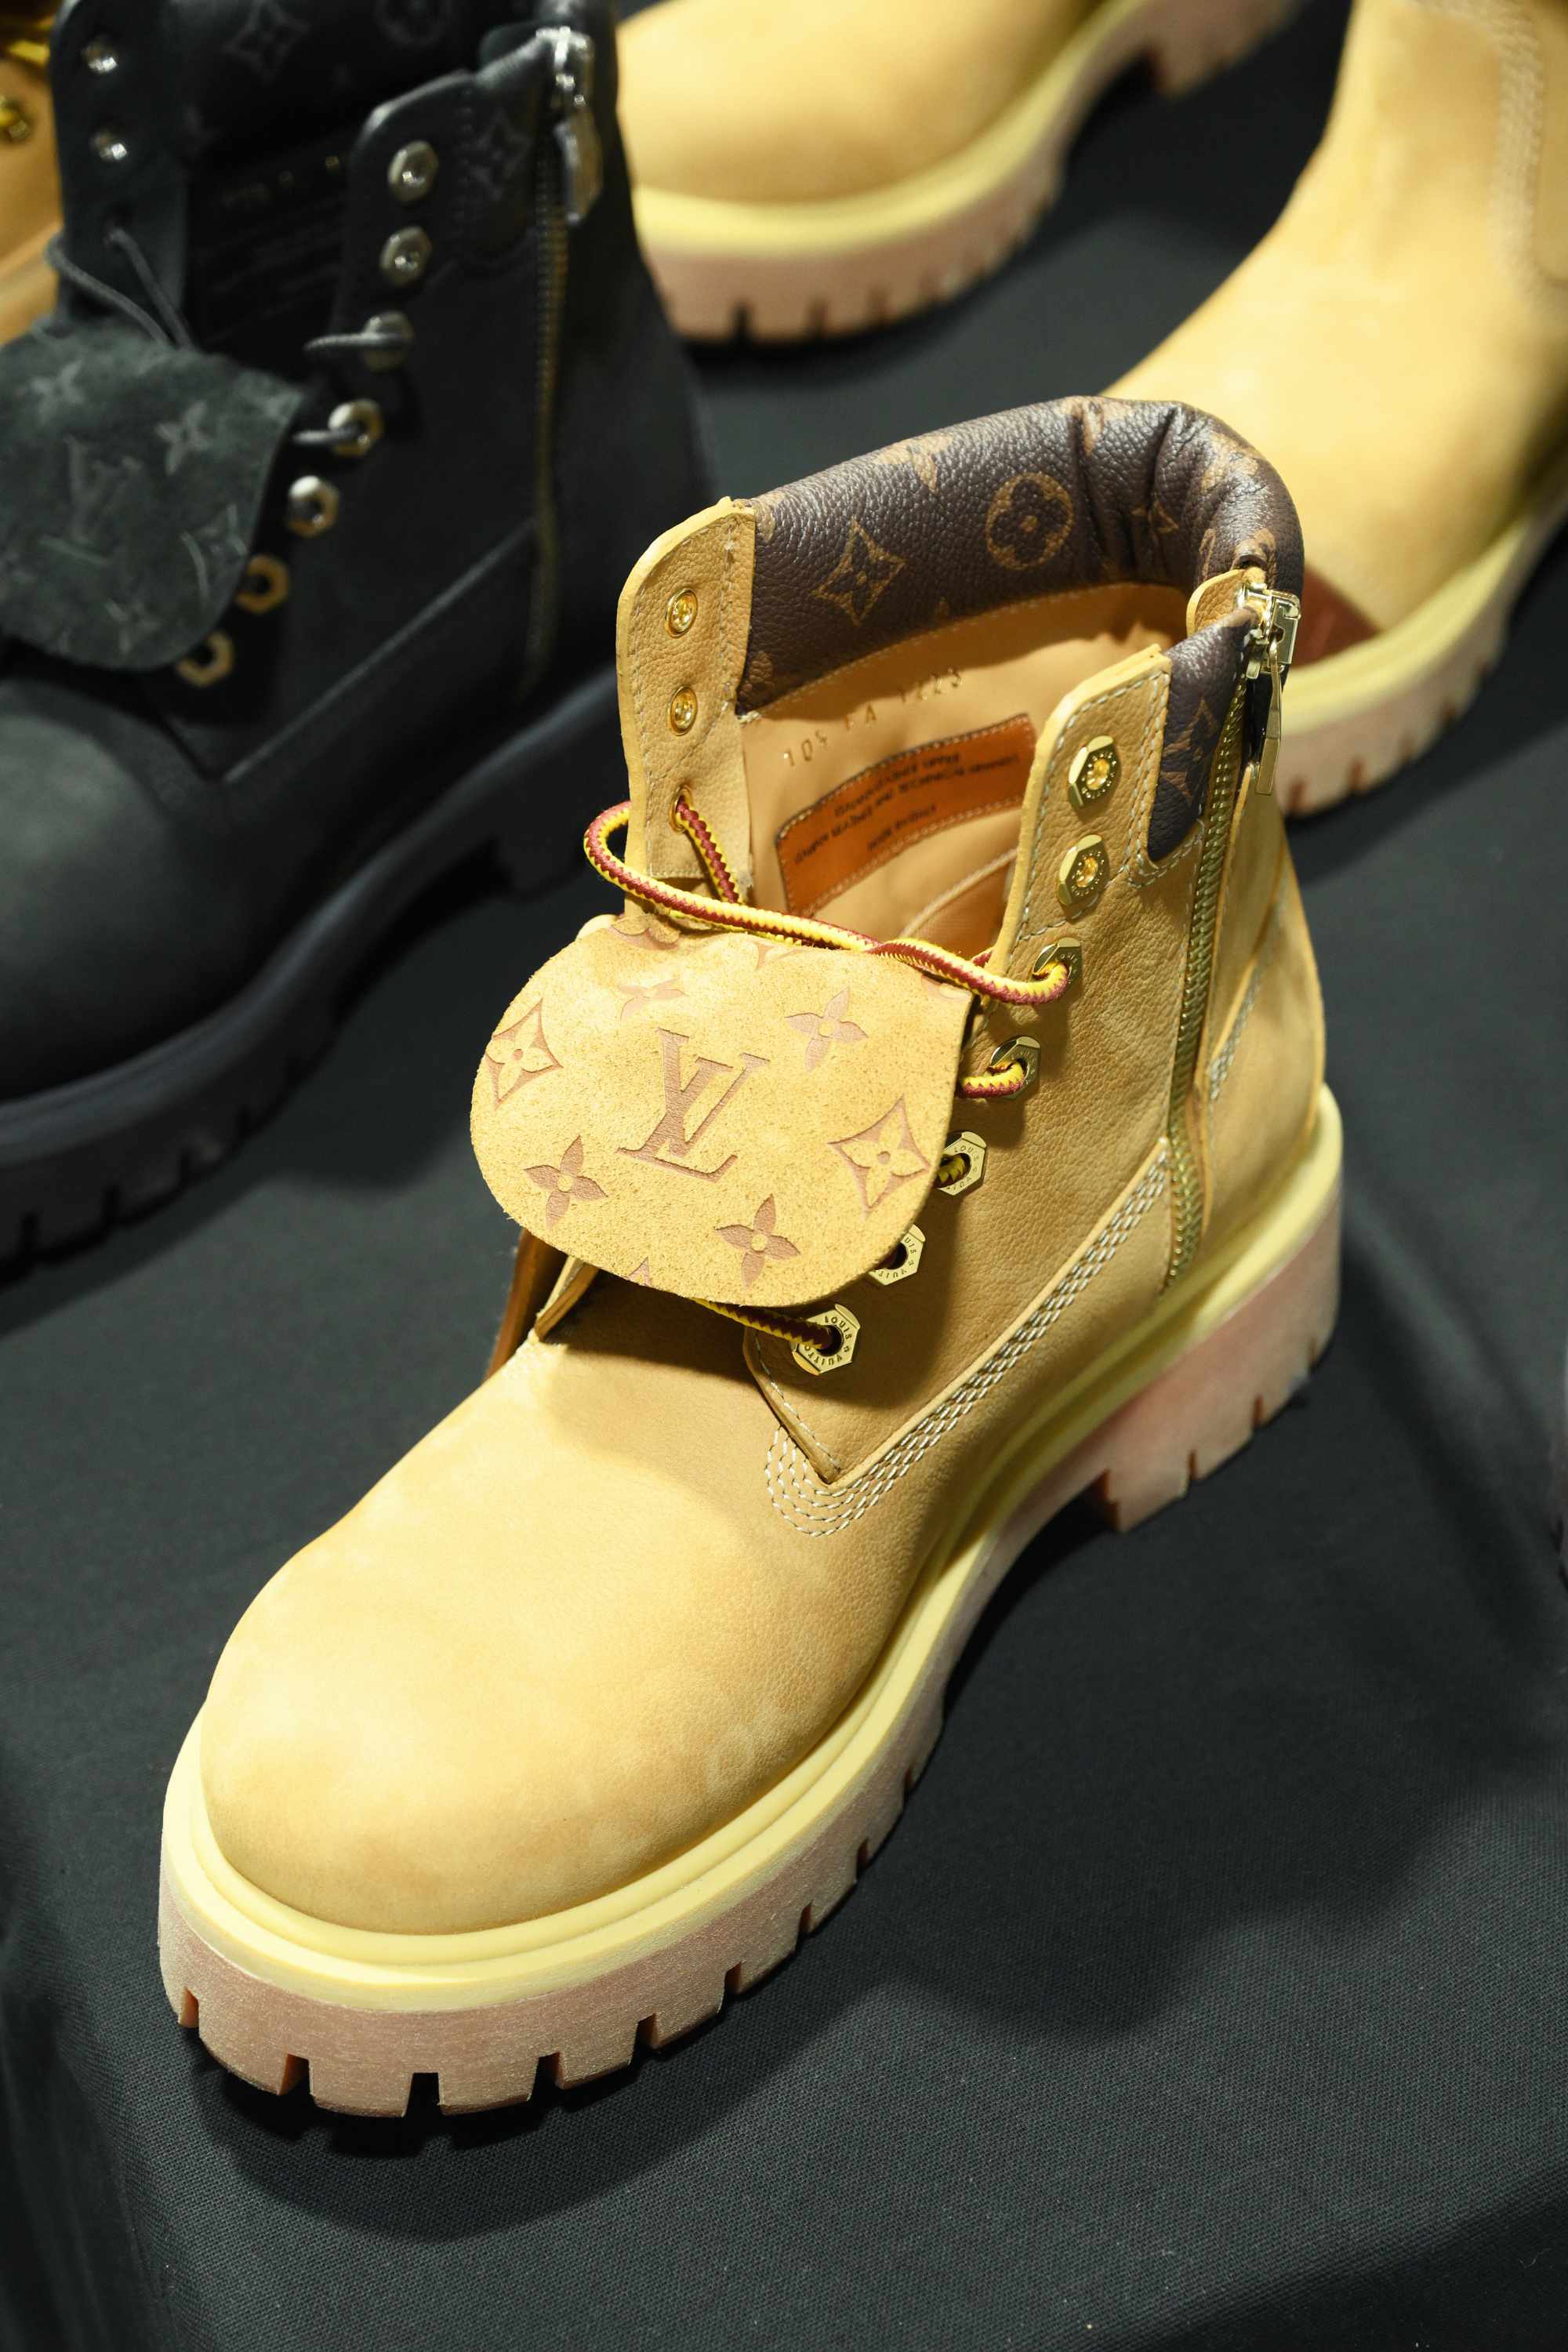 Louis Vuitton's Timberland boot collab revealed by Pharrell Williams, including beige and black 6" leather boots and ranger-style pull ons in Louis Vuitton-monogrammed boxes